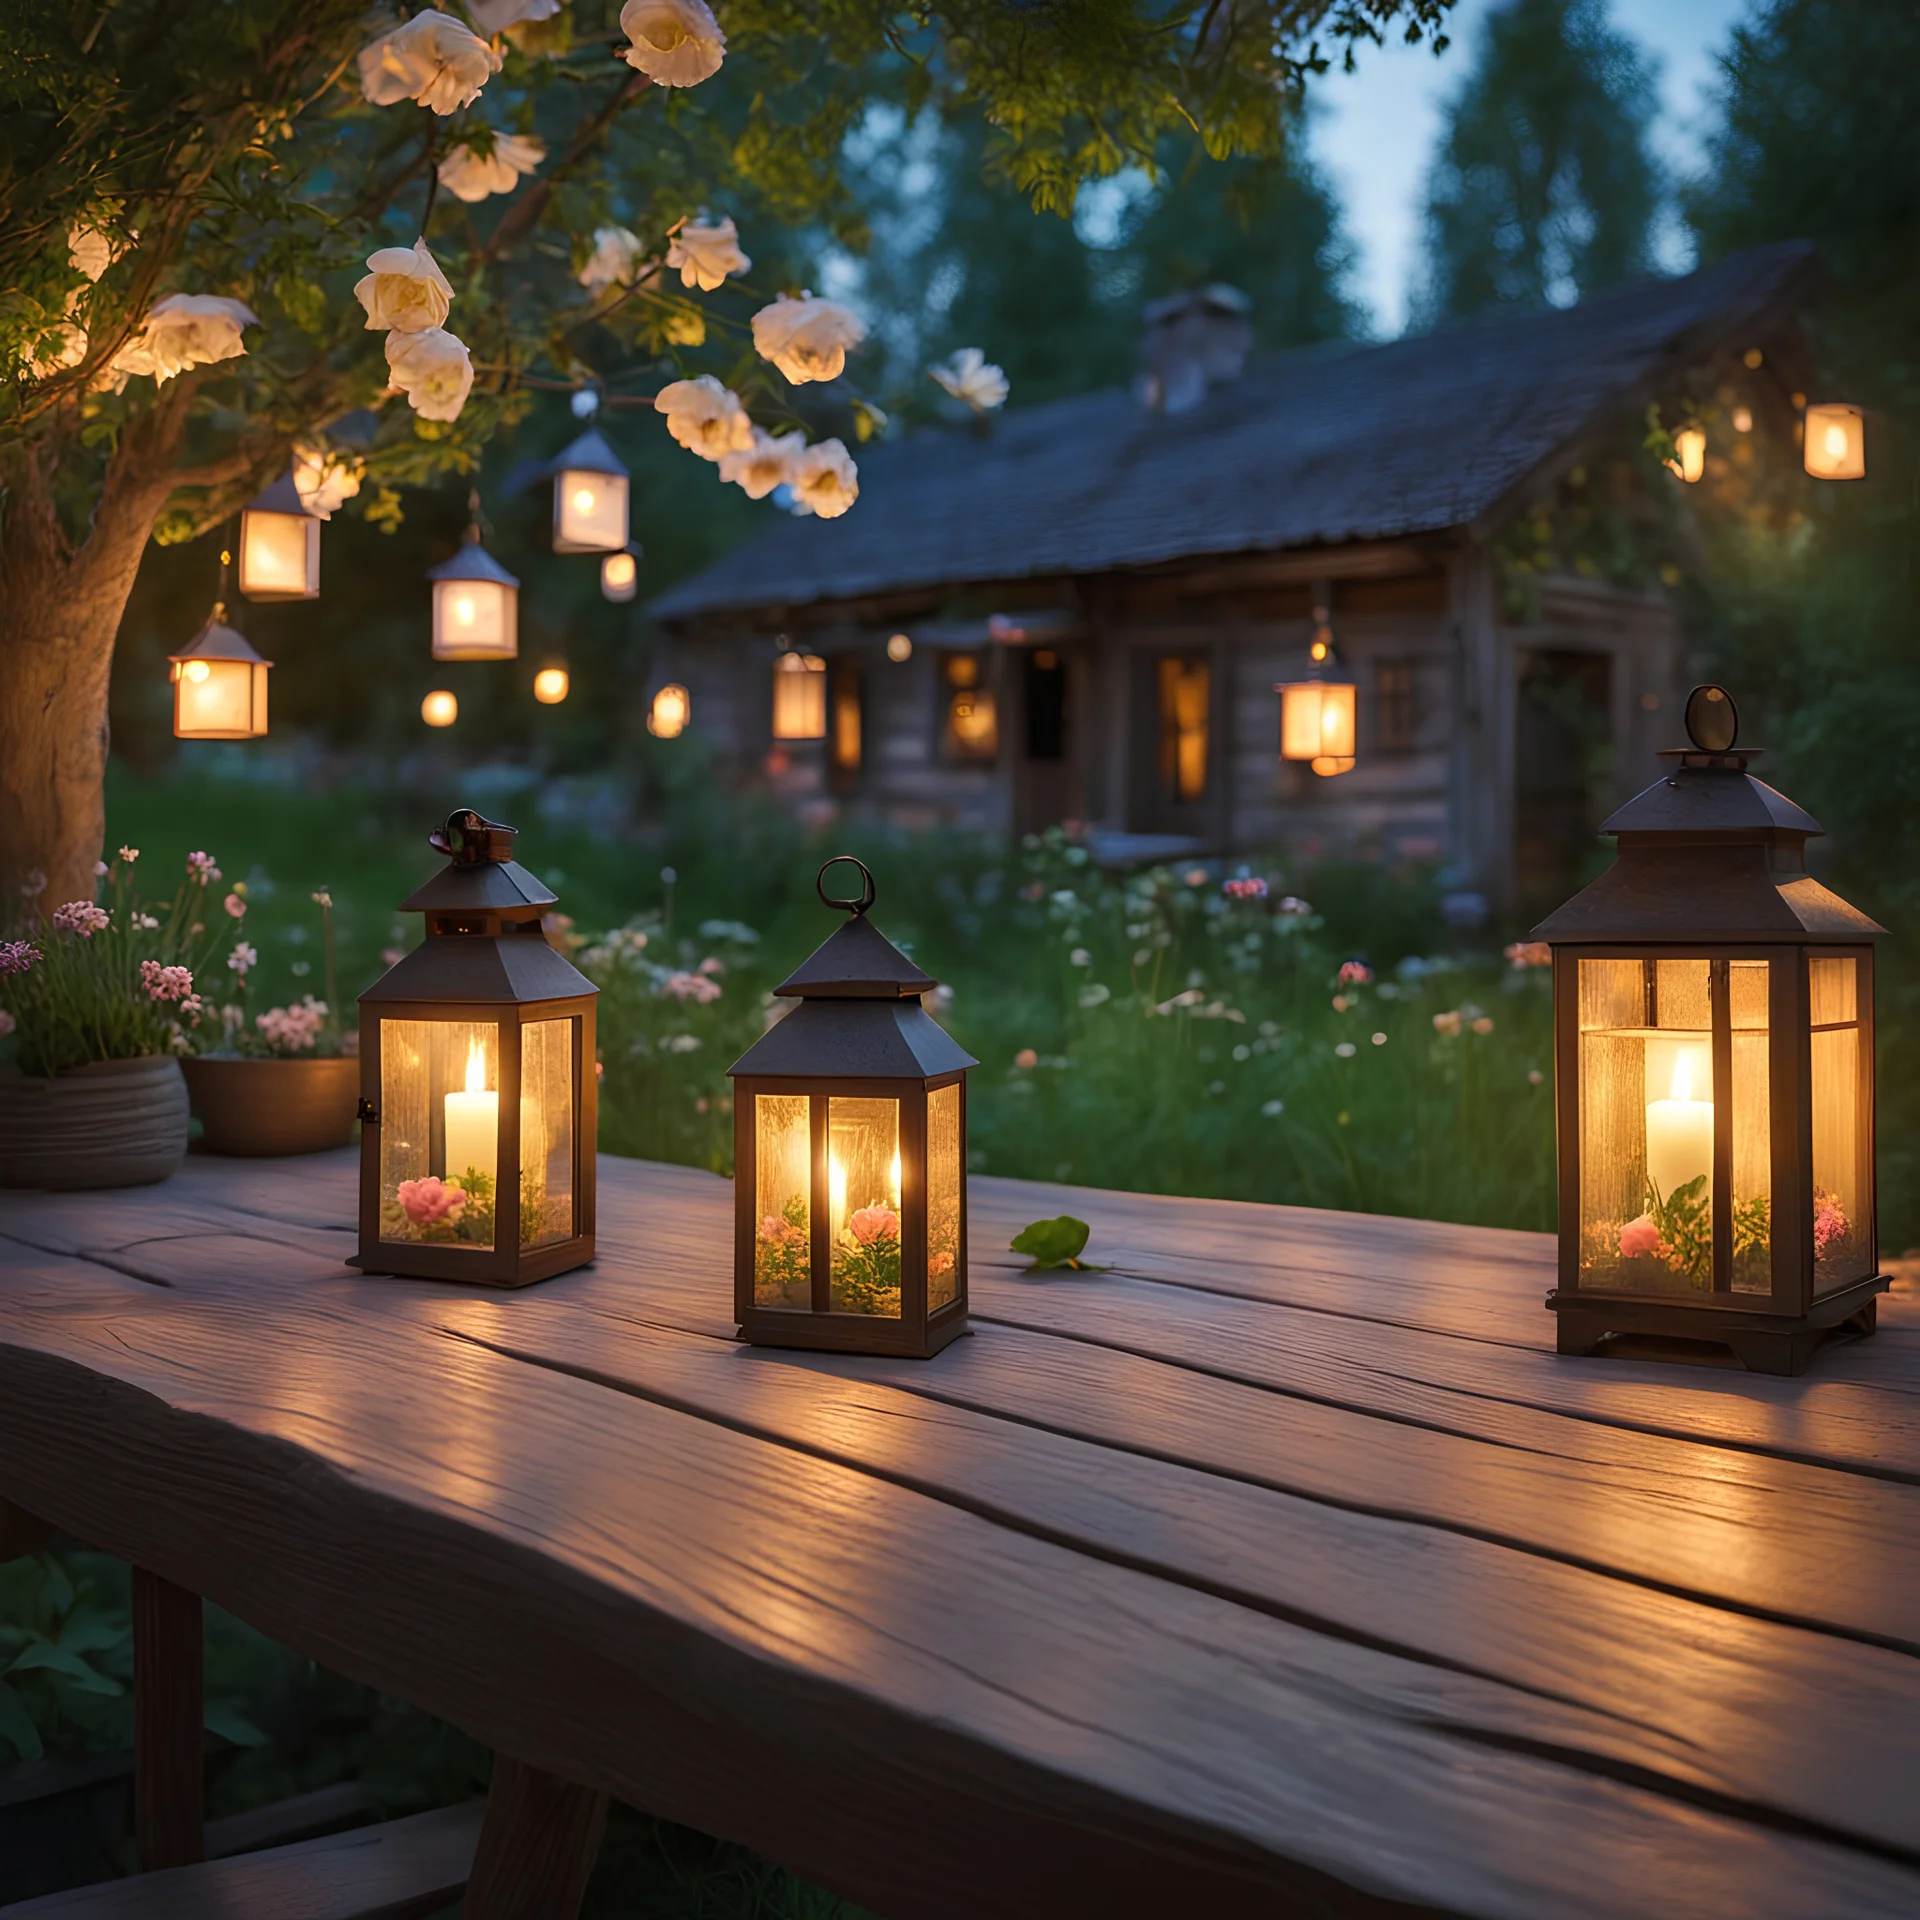 In the serene ambiance of the cottage yard on a warm Spring evening, a rustic wooden table sits, bathed in the warm glow of candlelit lanterns. Delicate flowers adorn its surface, their fragrance mingling with the gentle breeze. Nearby, a small kitty hops about, adding an enchanting touch to the idyllic tableau, realistic photo, 8K